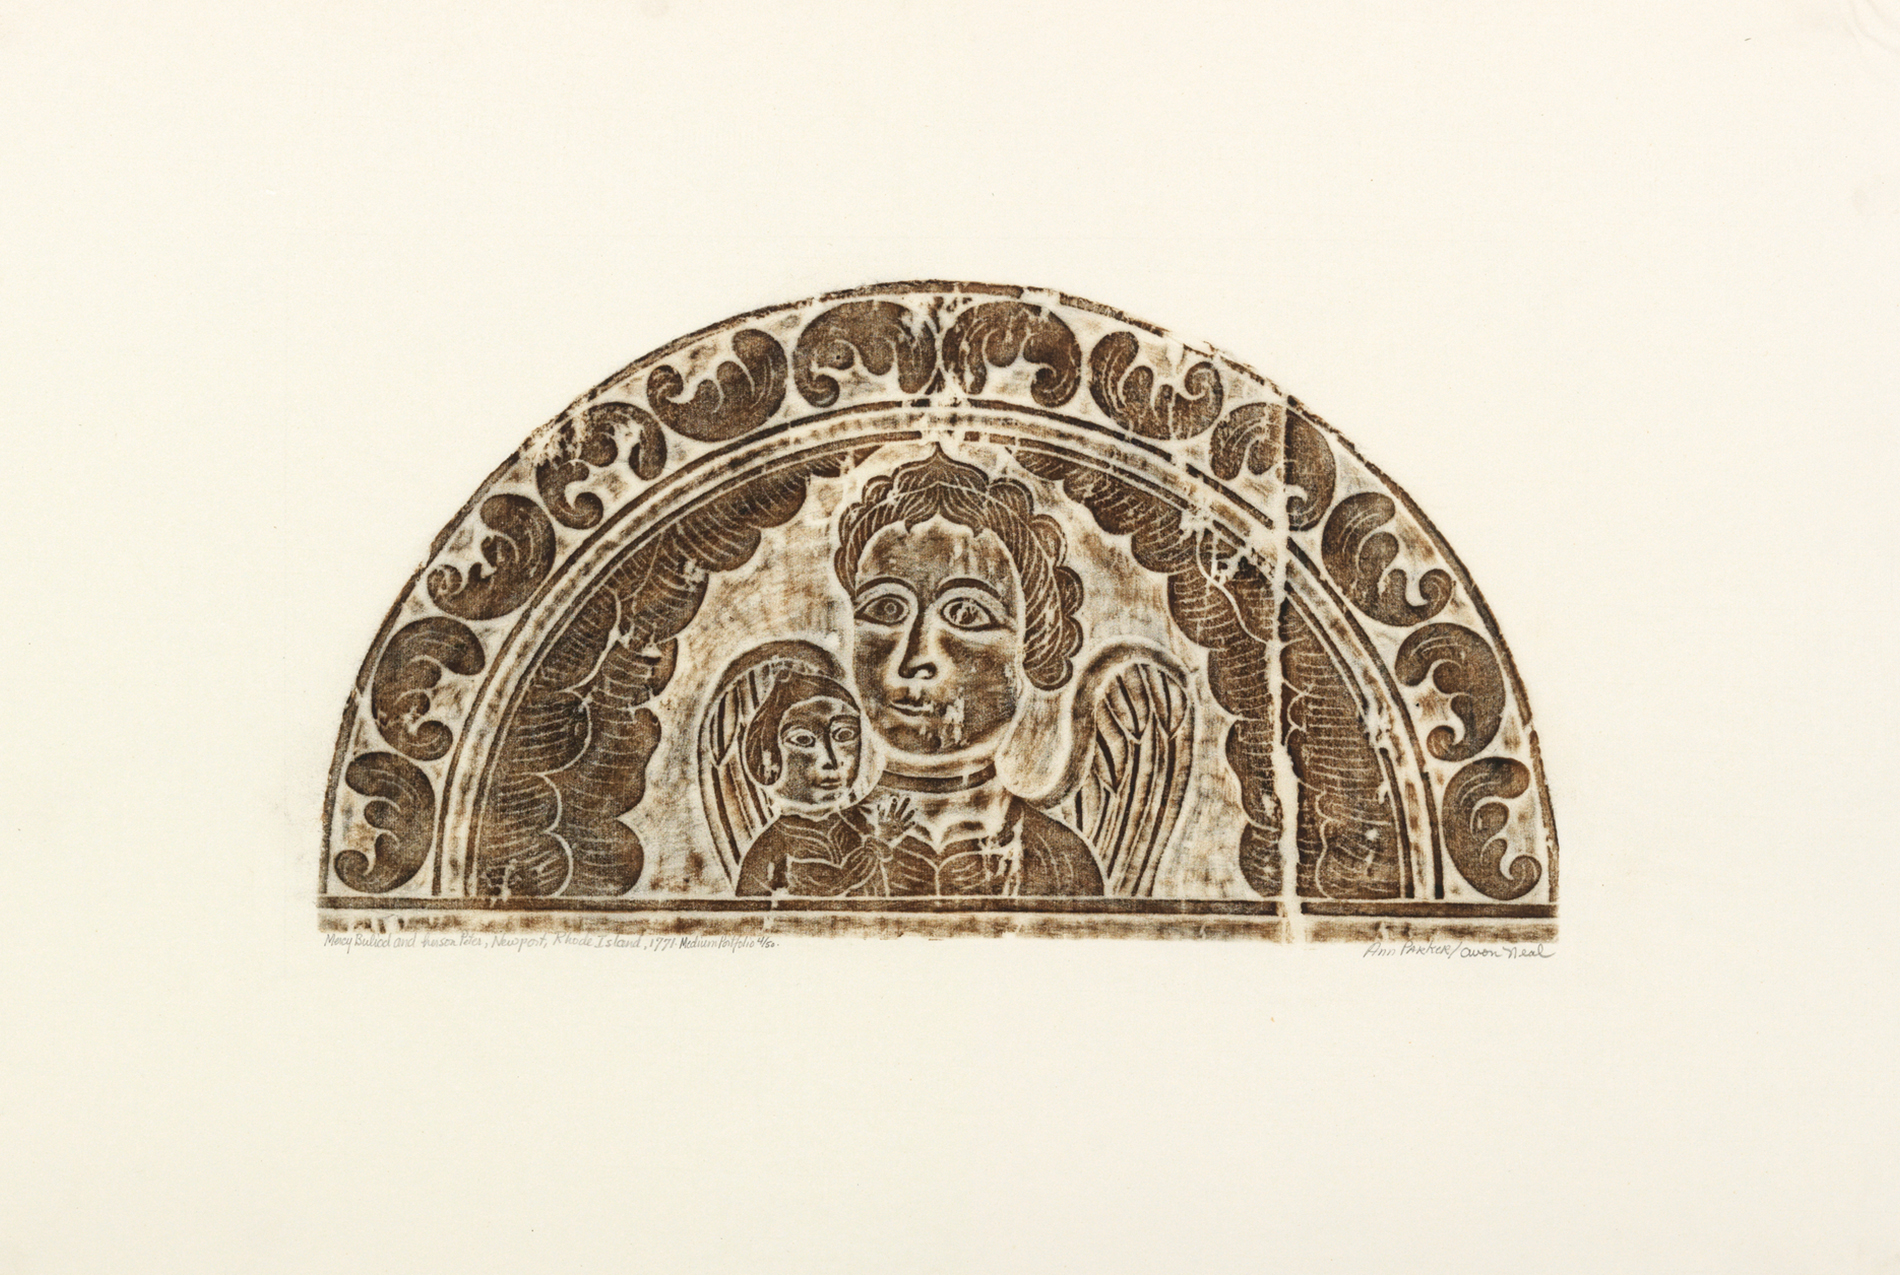 semi-circle shaped image containing angel with child's face next to it; elaborate flower patterns along the outer edges.